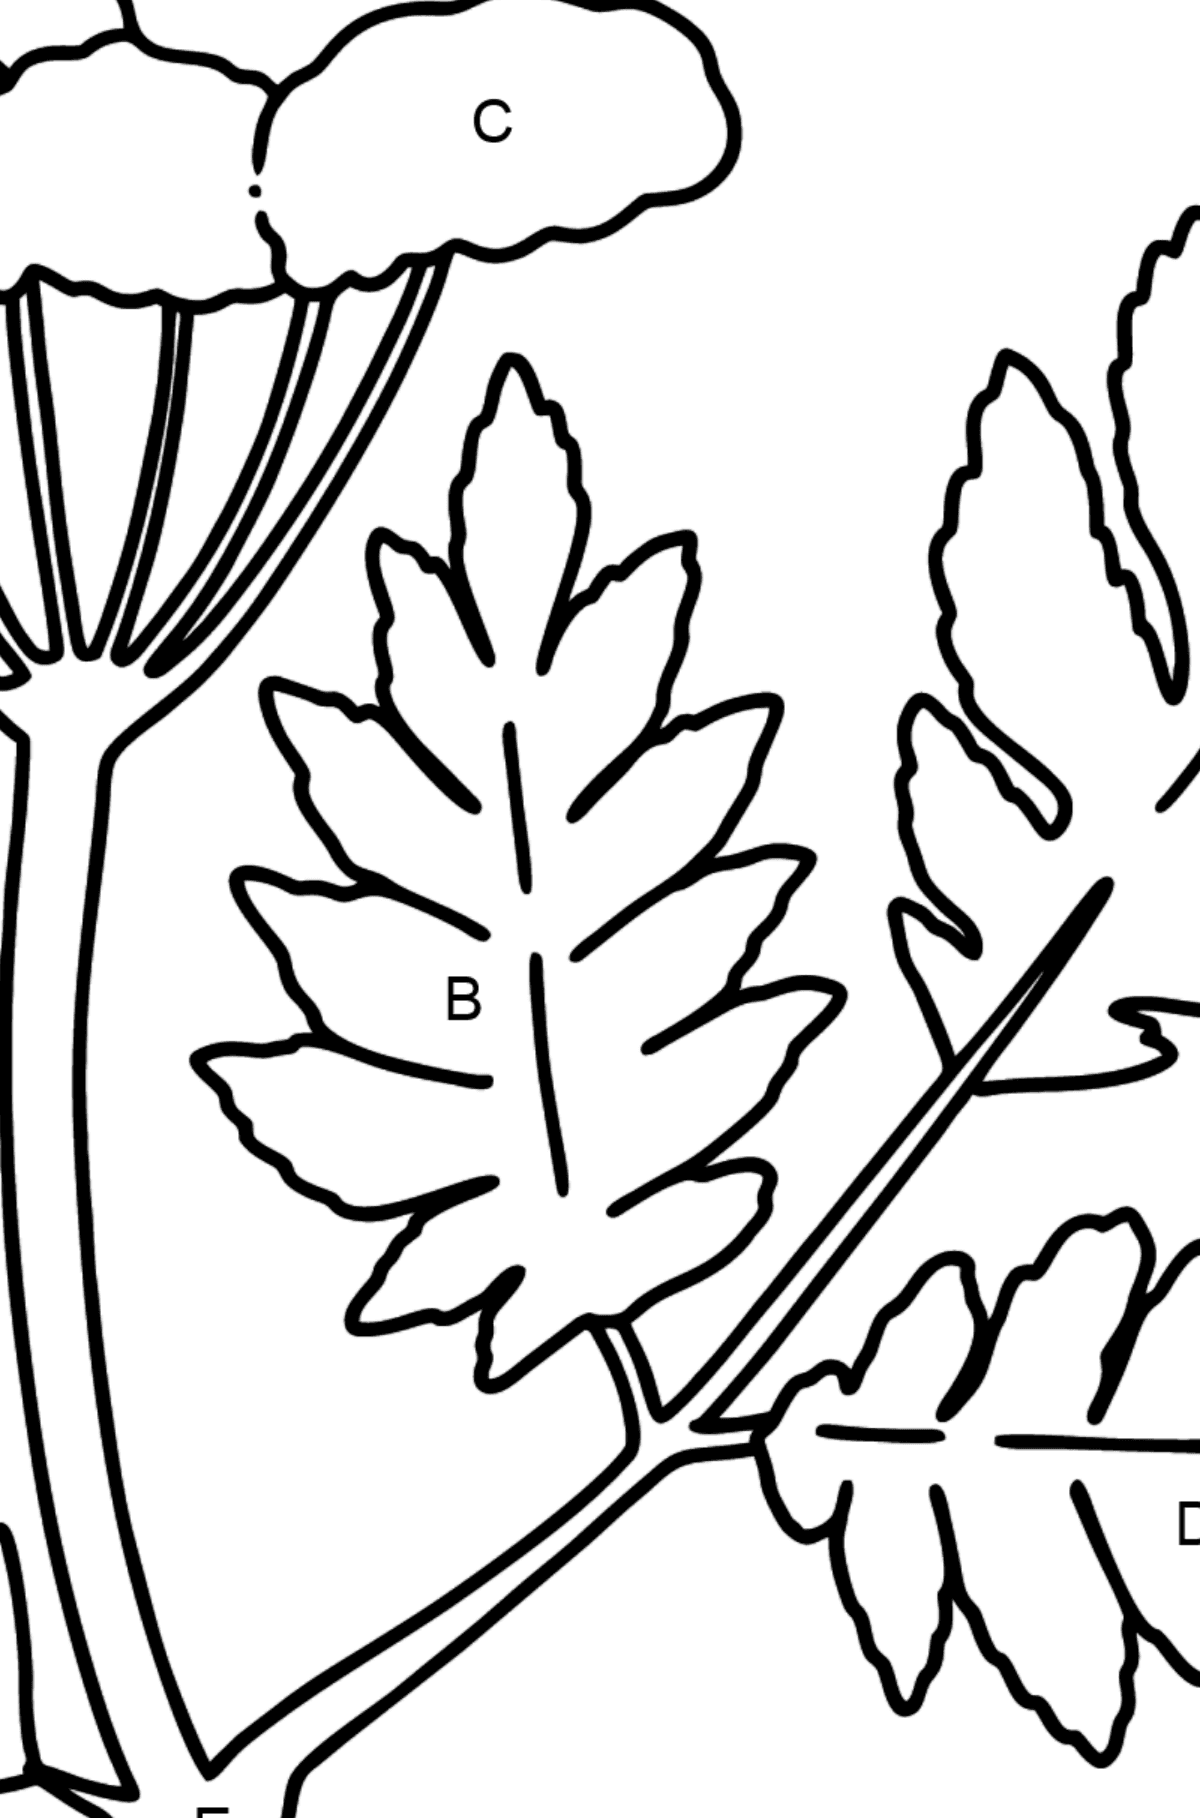 Hemlock coloring page - Coloring by Letters for Kids